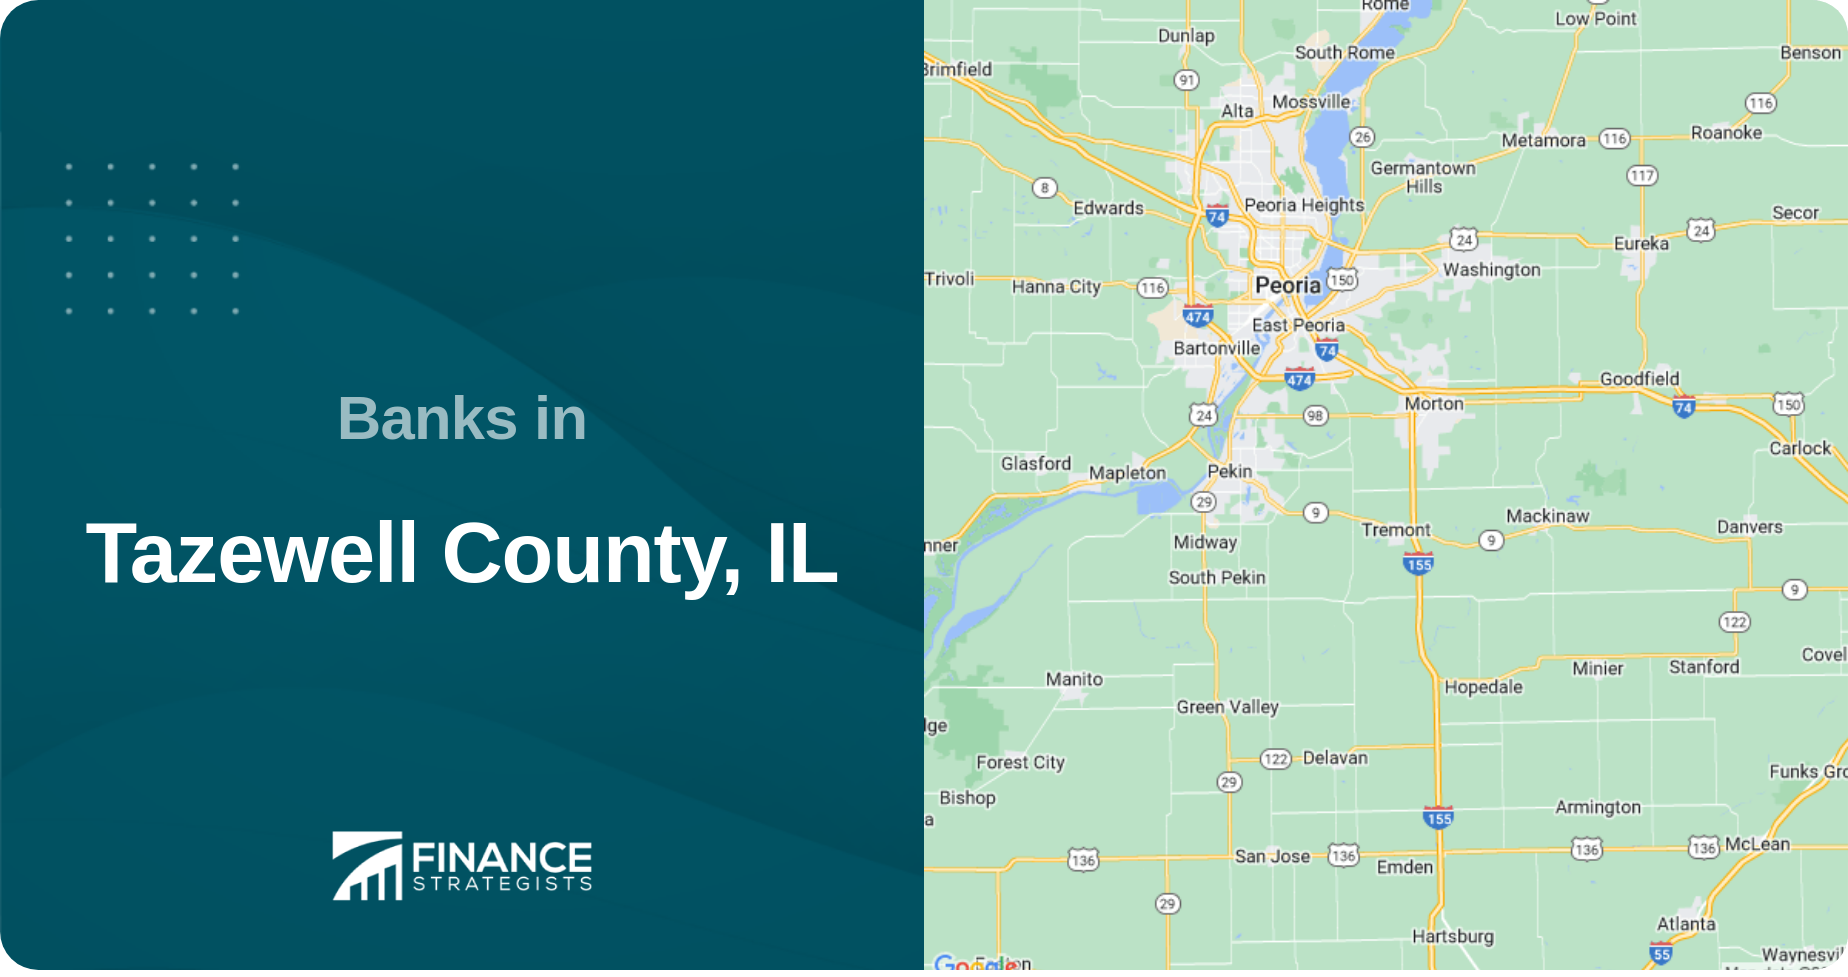 Banks in Tazewell County, IL